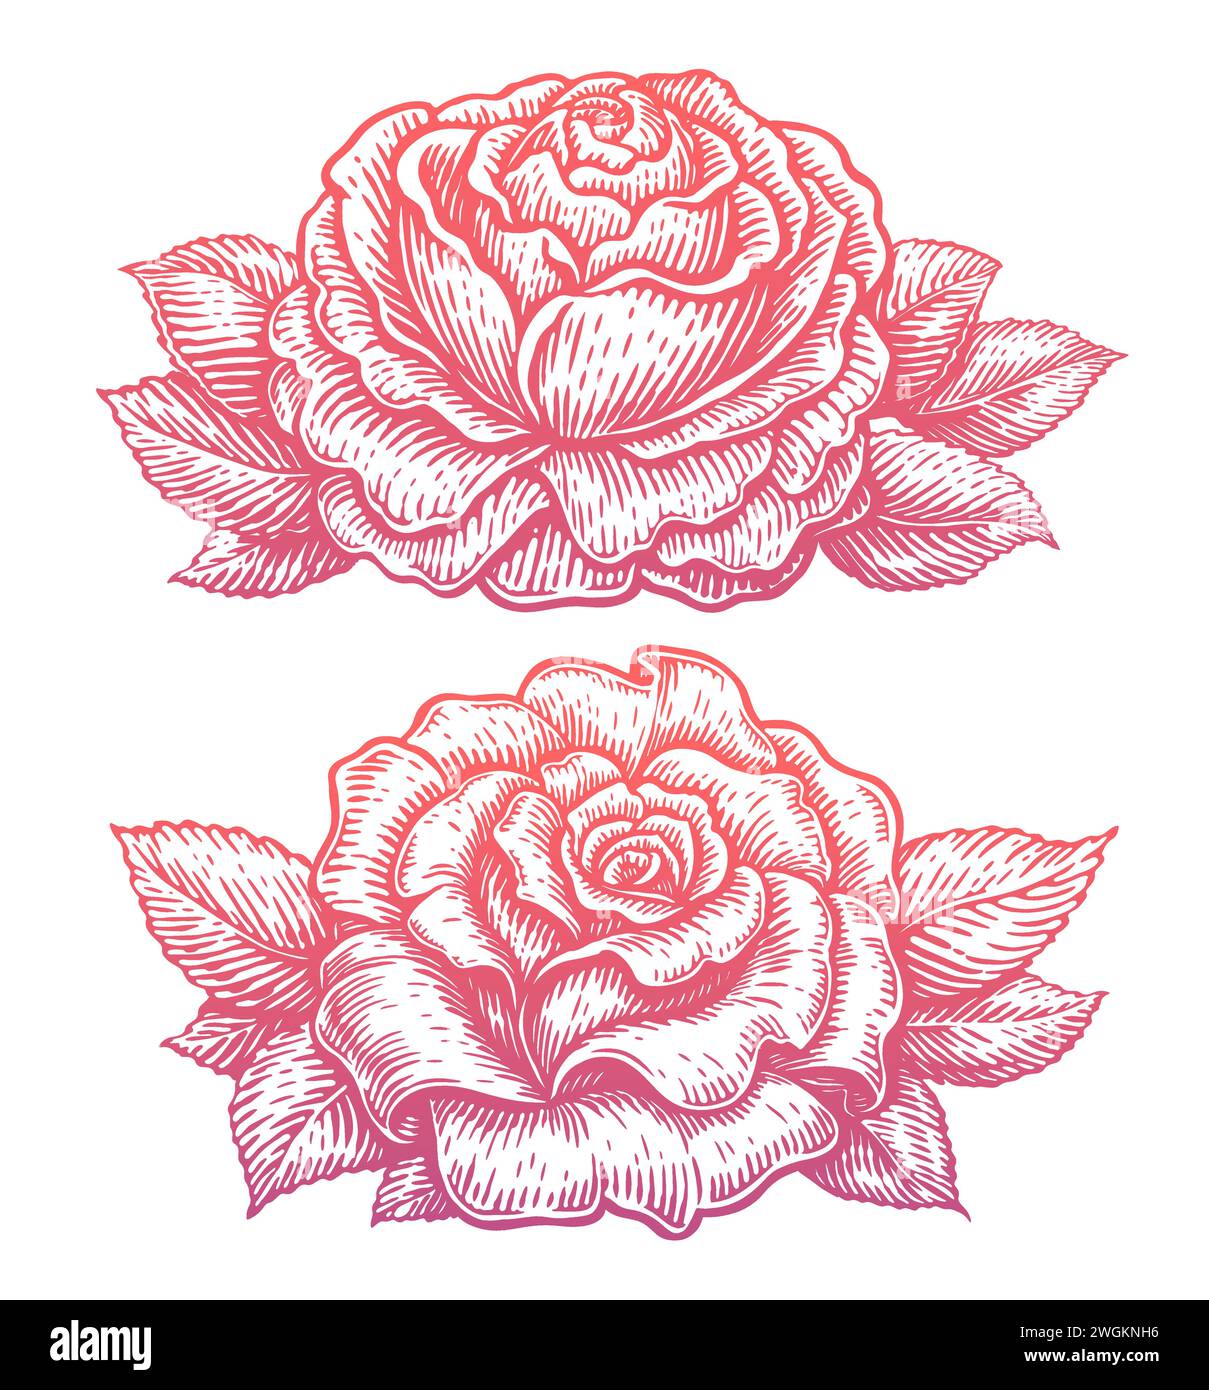 Rose flower with leaves hand drawn in sketch style. Floral pattern. Vector illustration Stock Vector